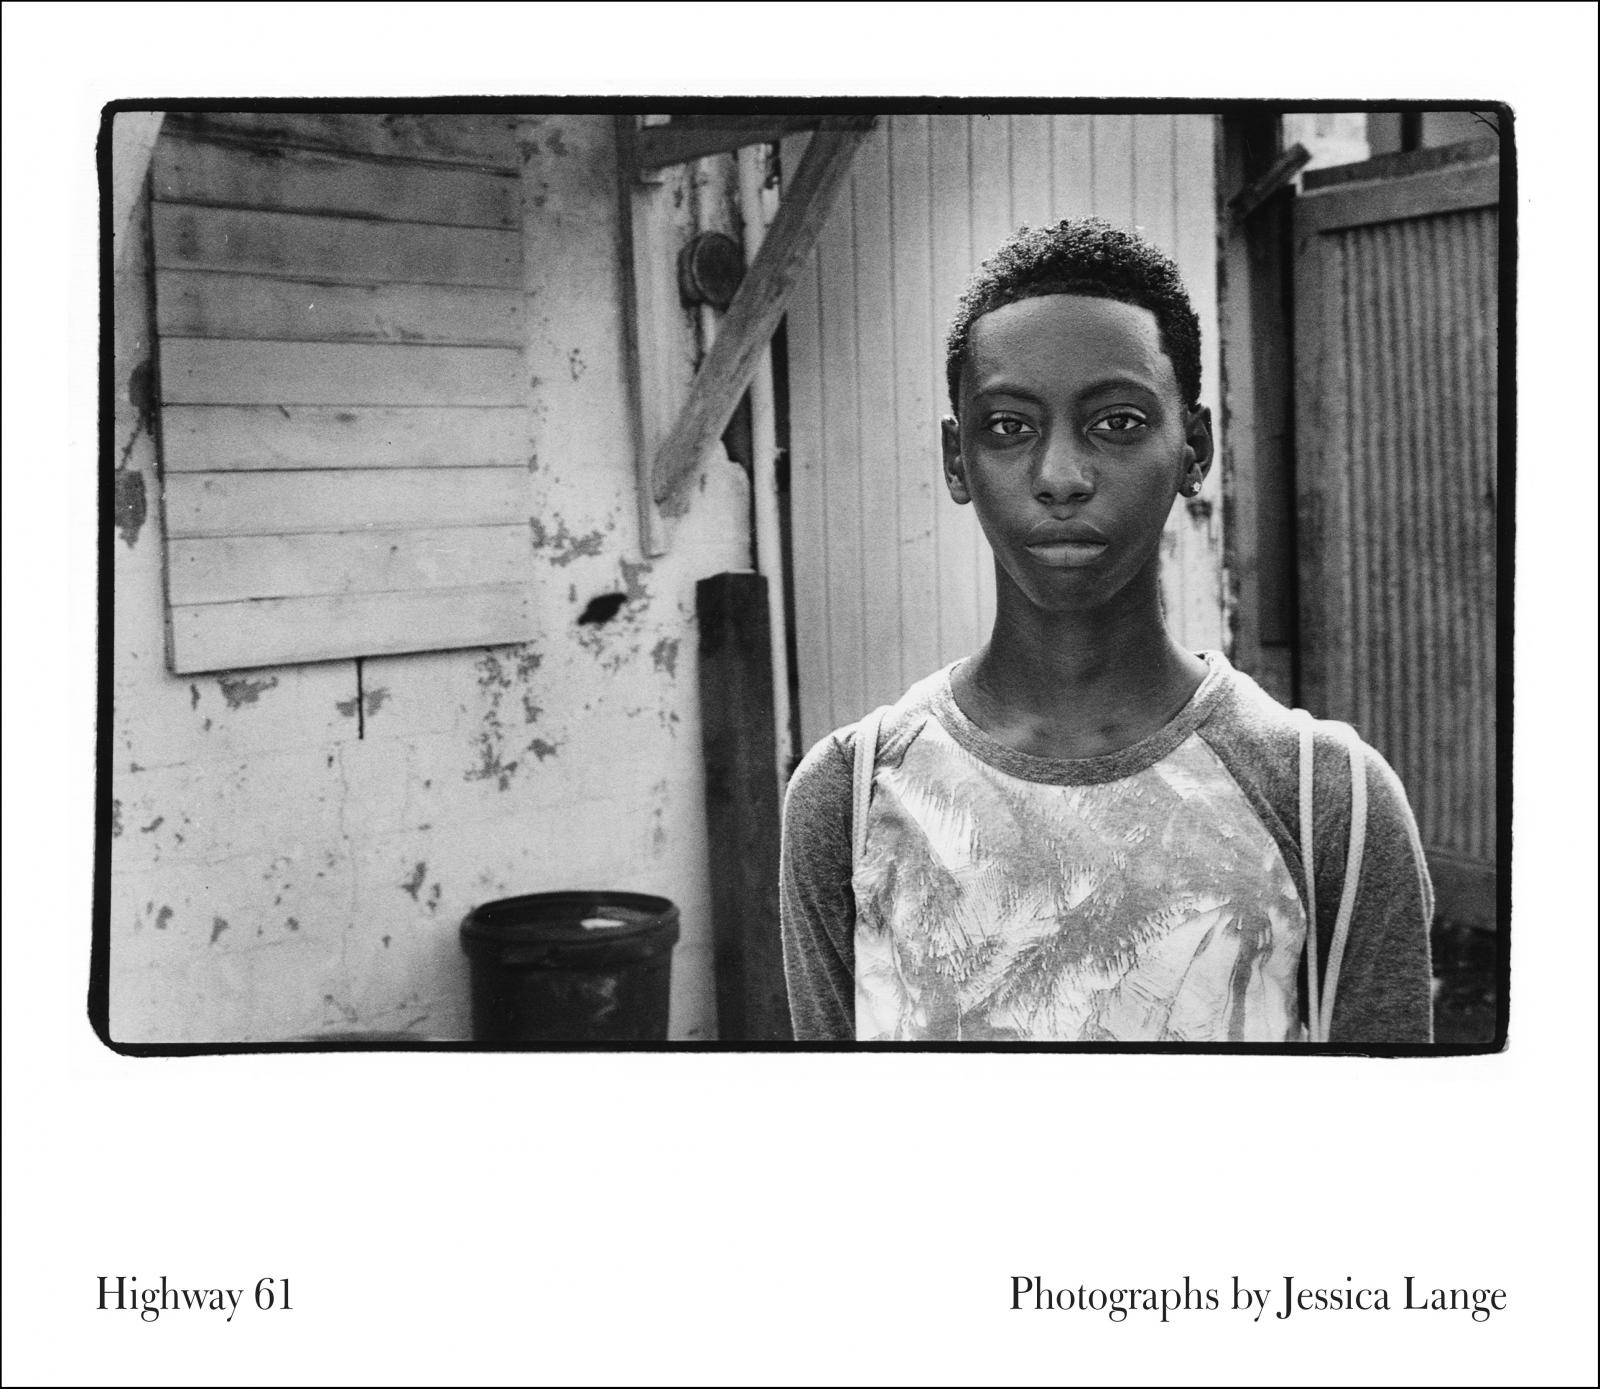 Jessica Lange talks about her photography book 'Highway 61'